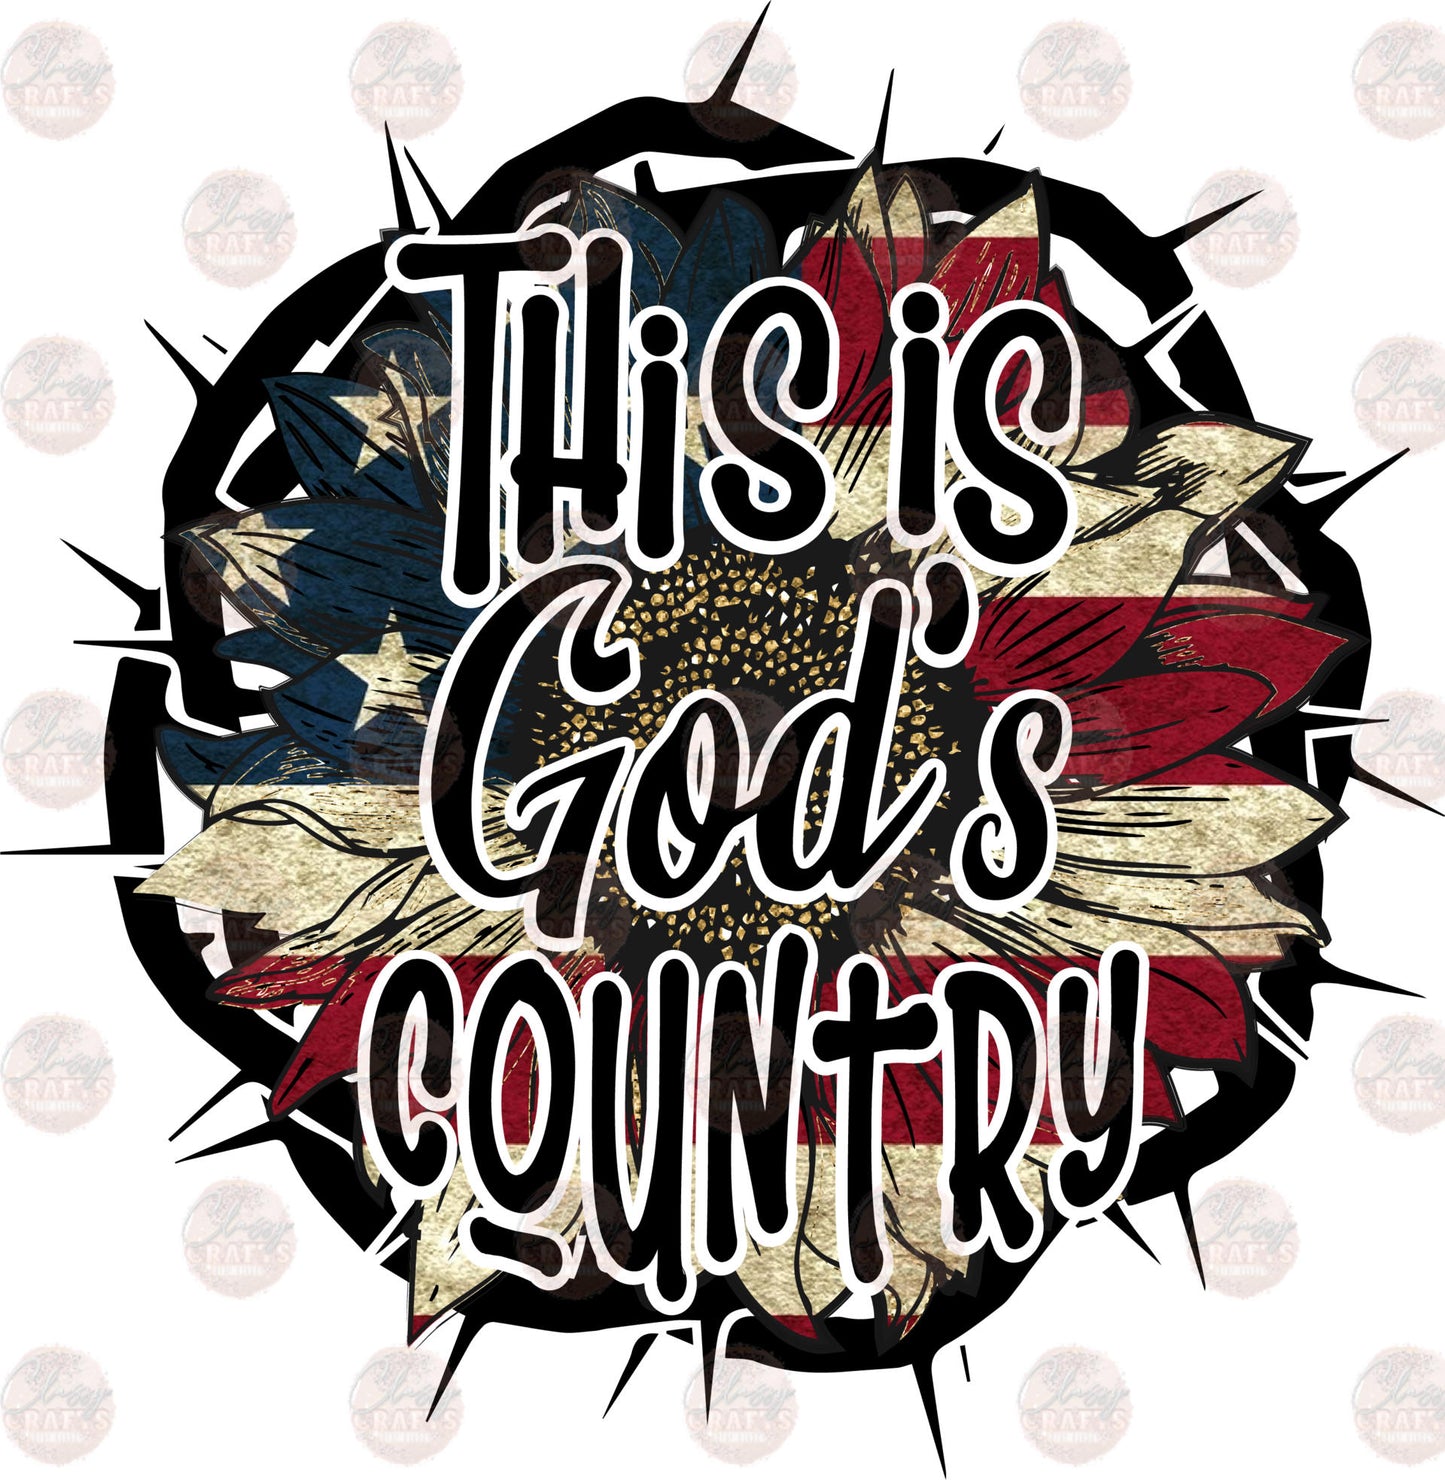 This Is Gods Country - Sublimation Transfer